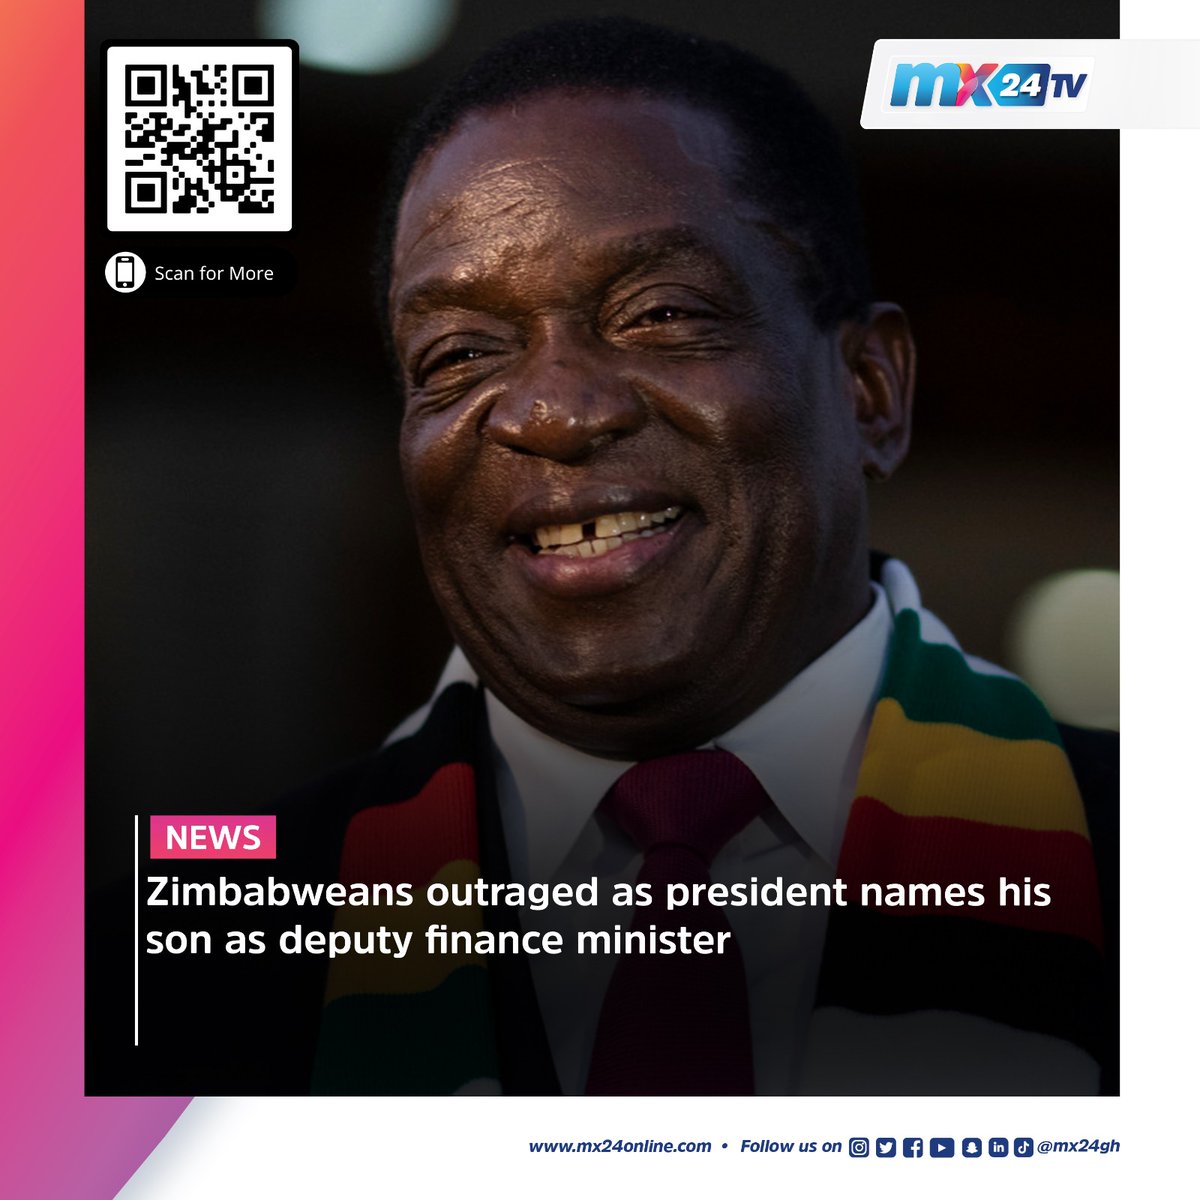 Here are today's biggest headlines. Scan the code to visit our website to read more.

#mx24gh #funfearlessfactual #mx24news #AmaGovernor #LegalCouncil #GhanaBar #IGP #LeakedTape #Dampare #Libya #Derna #UK #Assault #Surgeon #iPhone15 #Zimbabwe #Mnangagwa